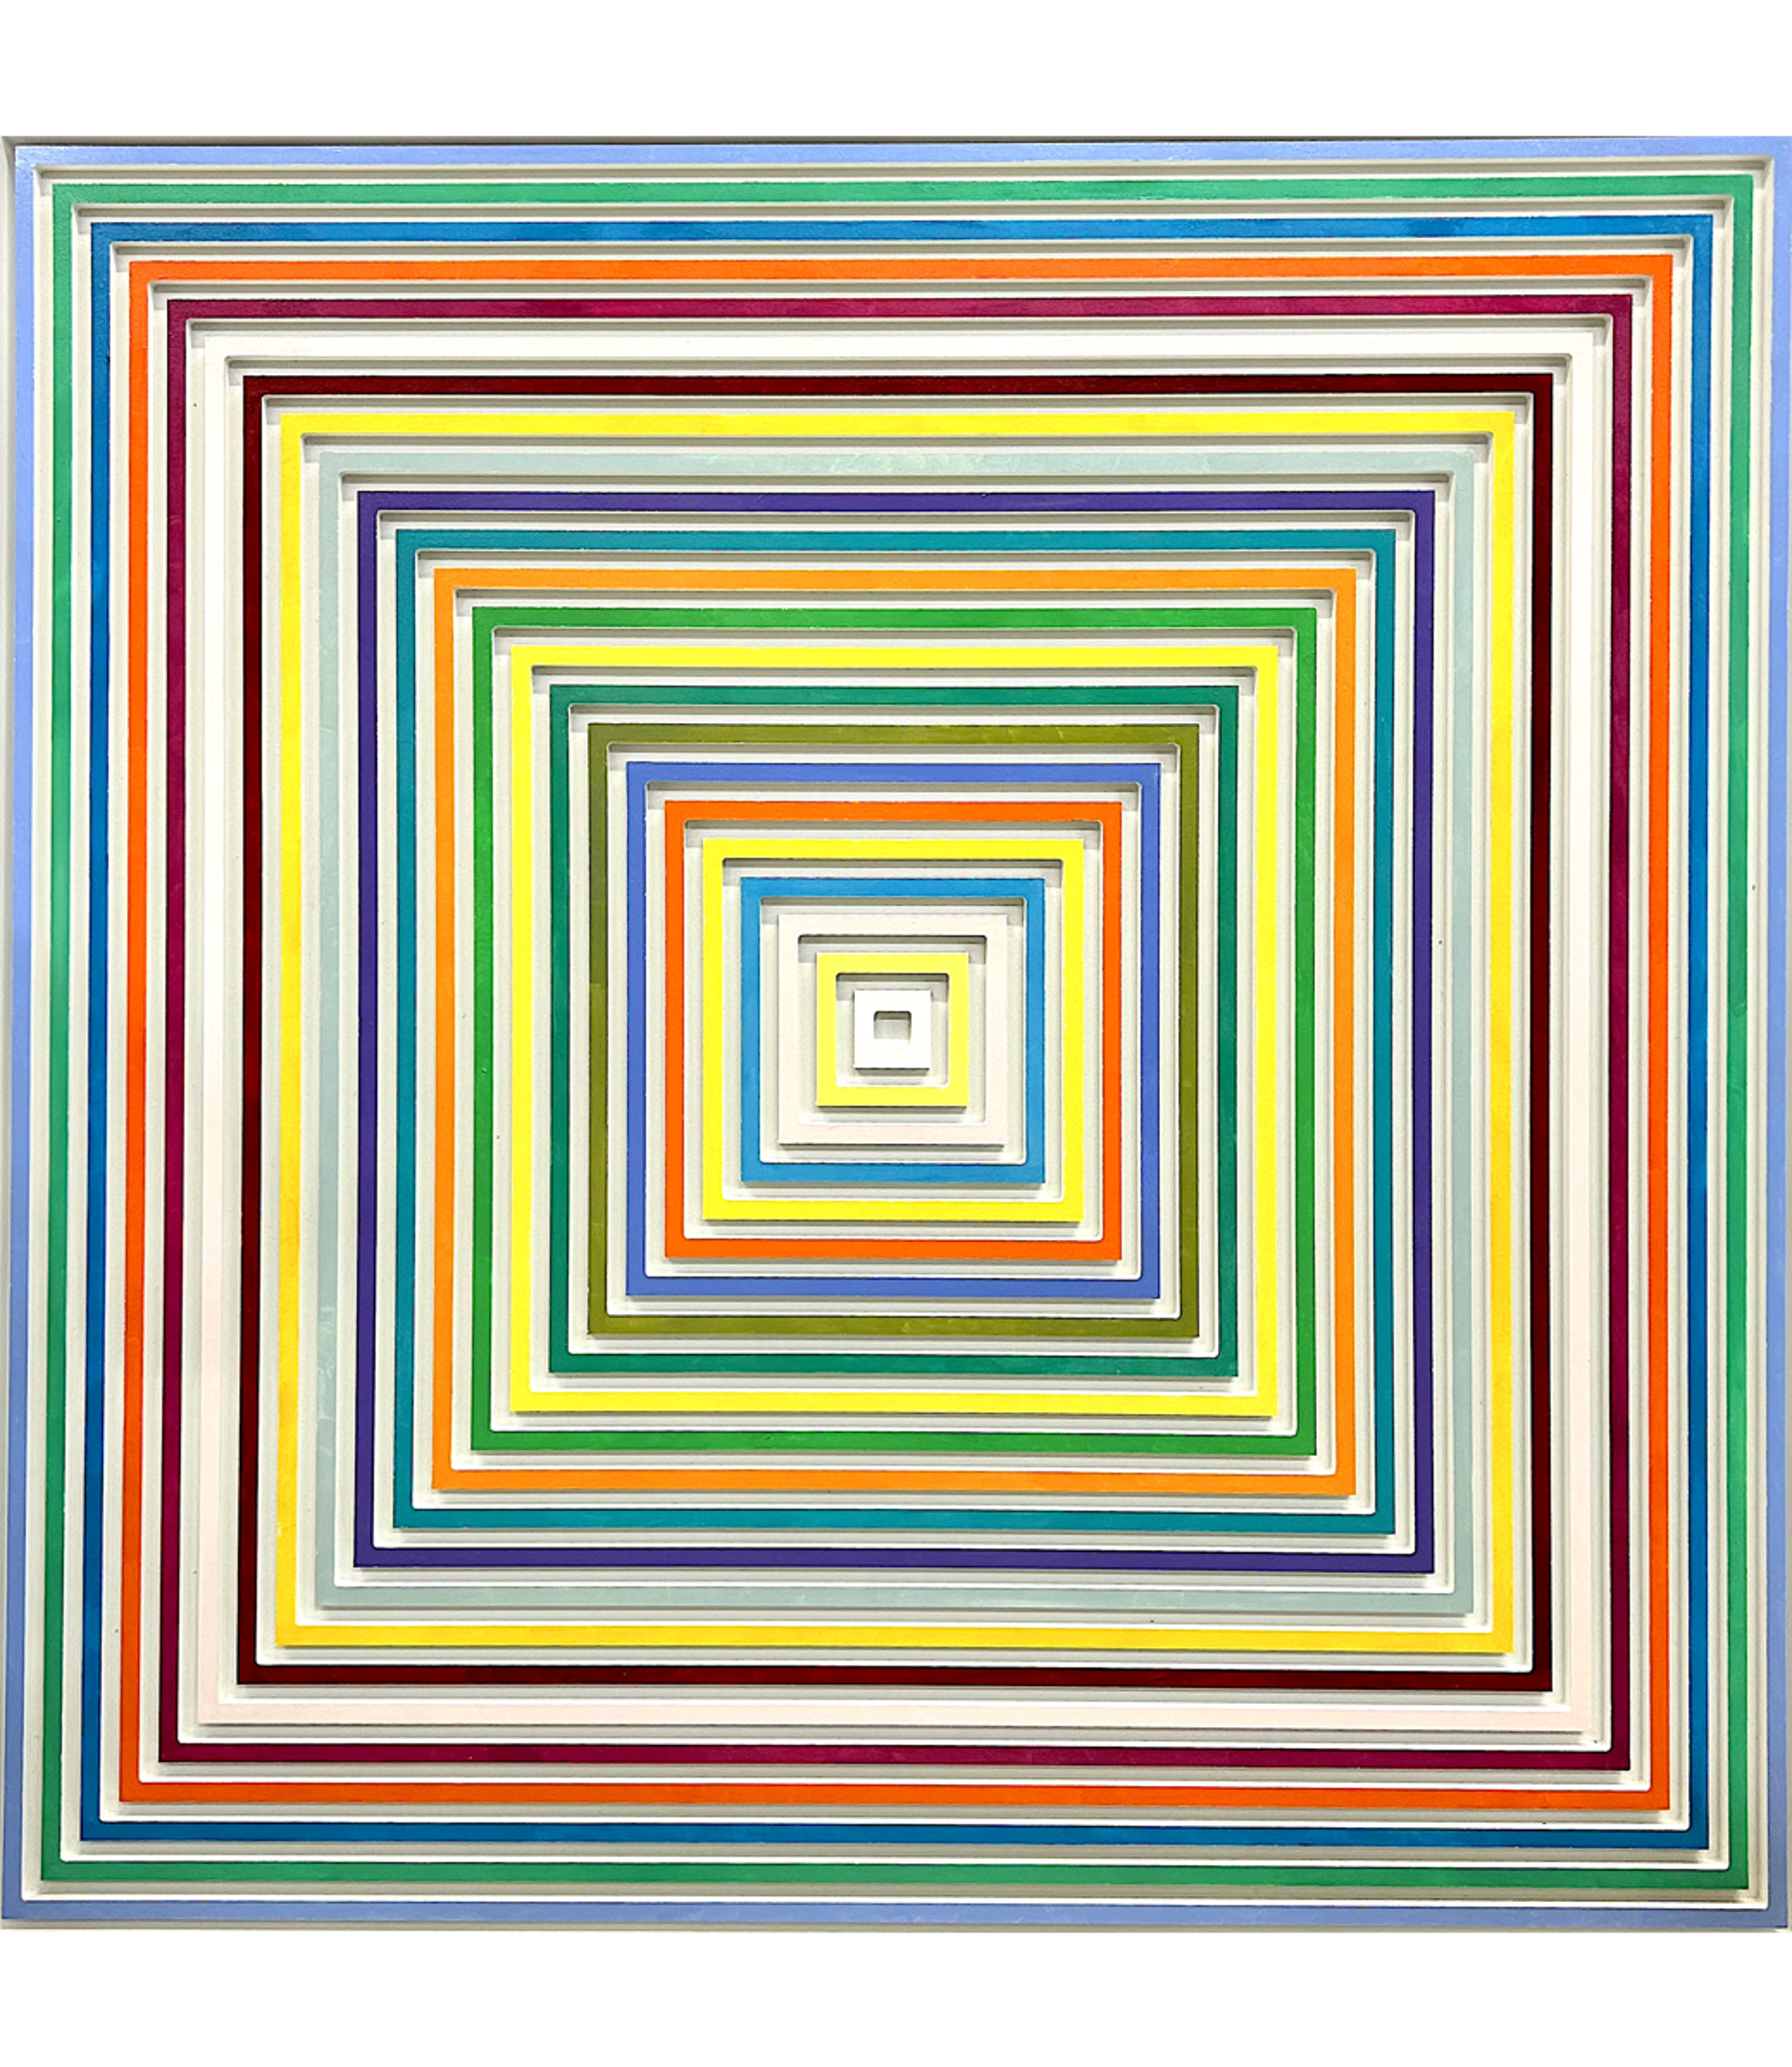 Euclid in the Rainbow by Ron Agam